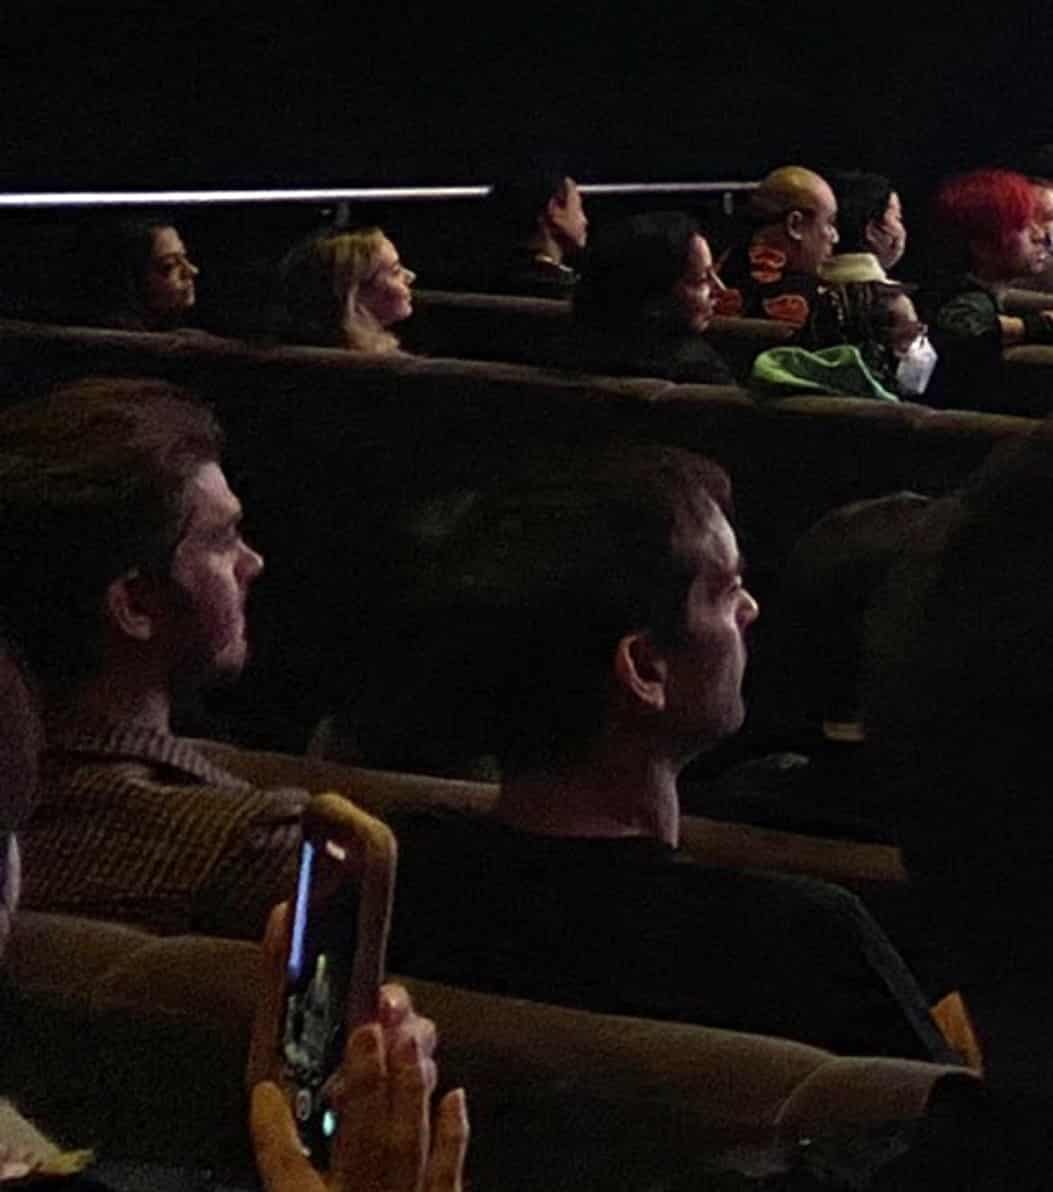 Tobey-And-Andrew-At-The-Movies-Together-2 Tobey Maguire And Andrew Garfield Go To The Movies Together Again